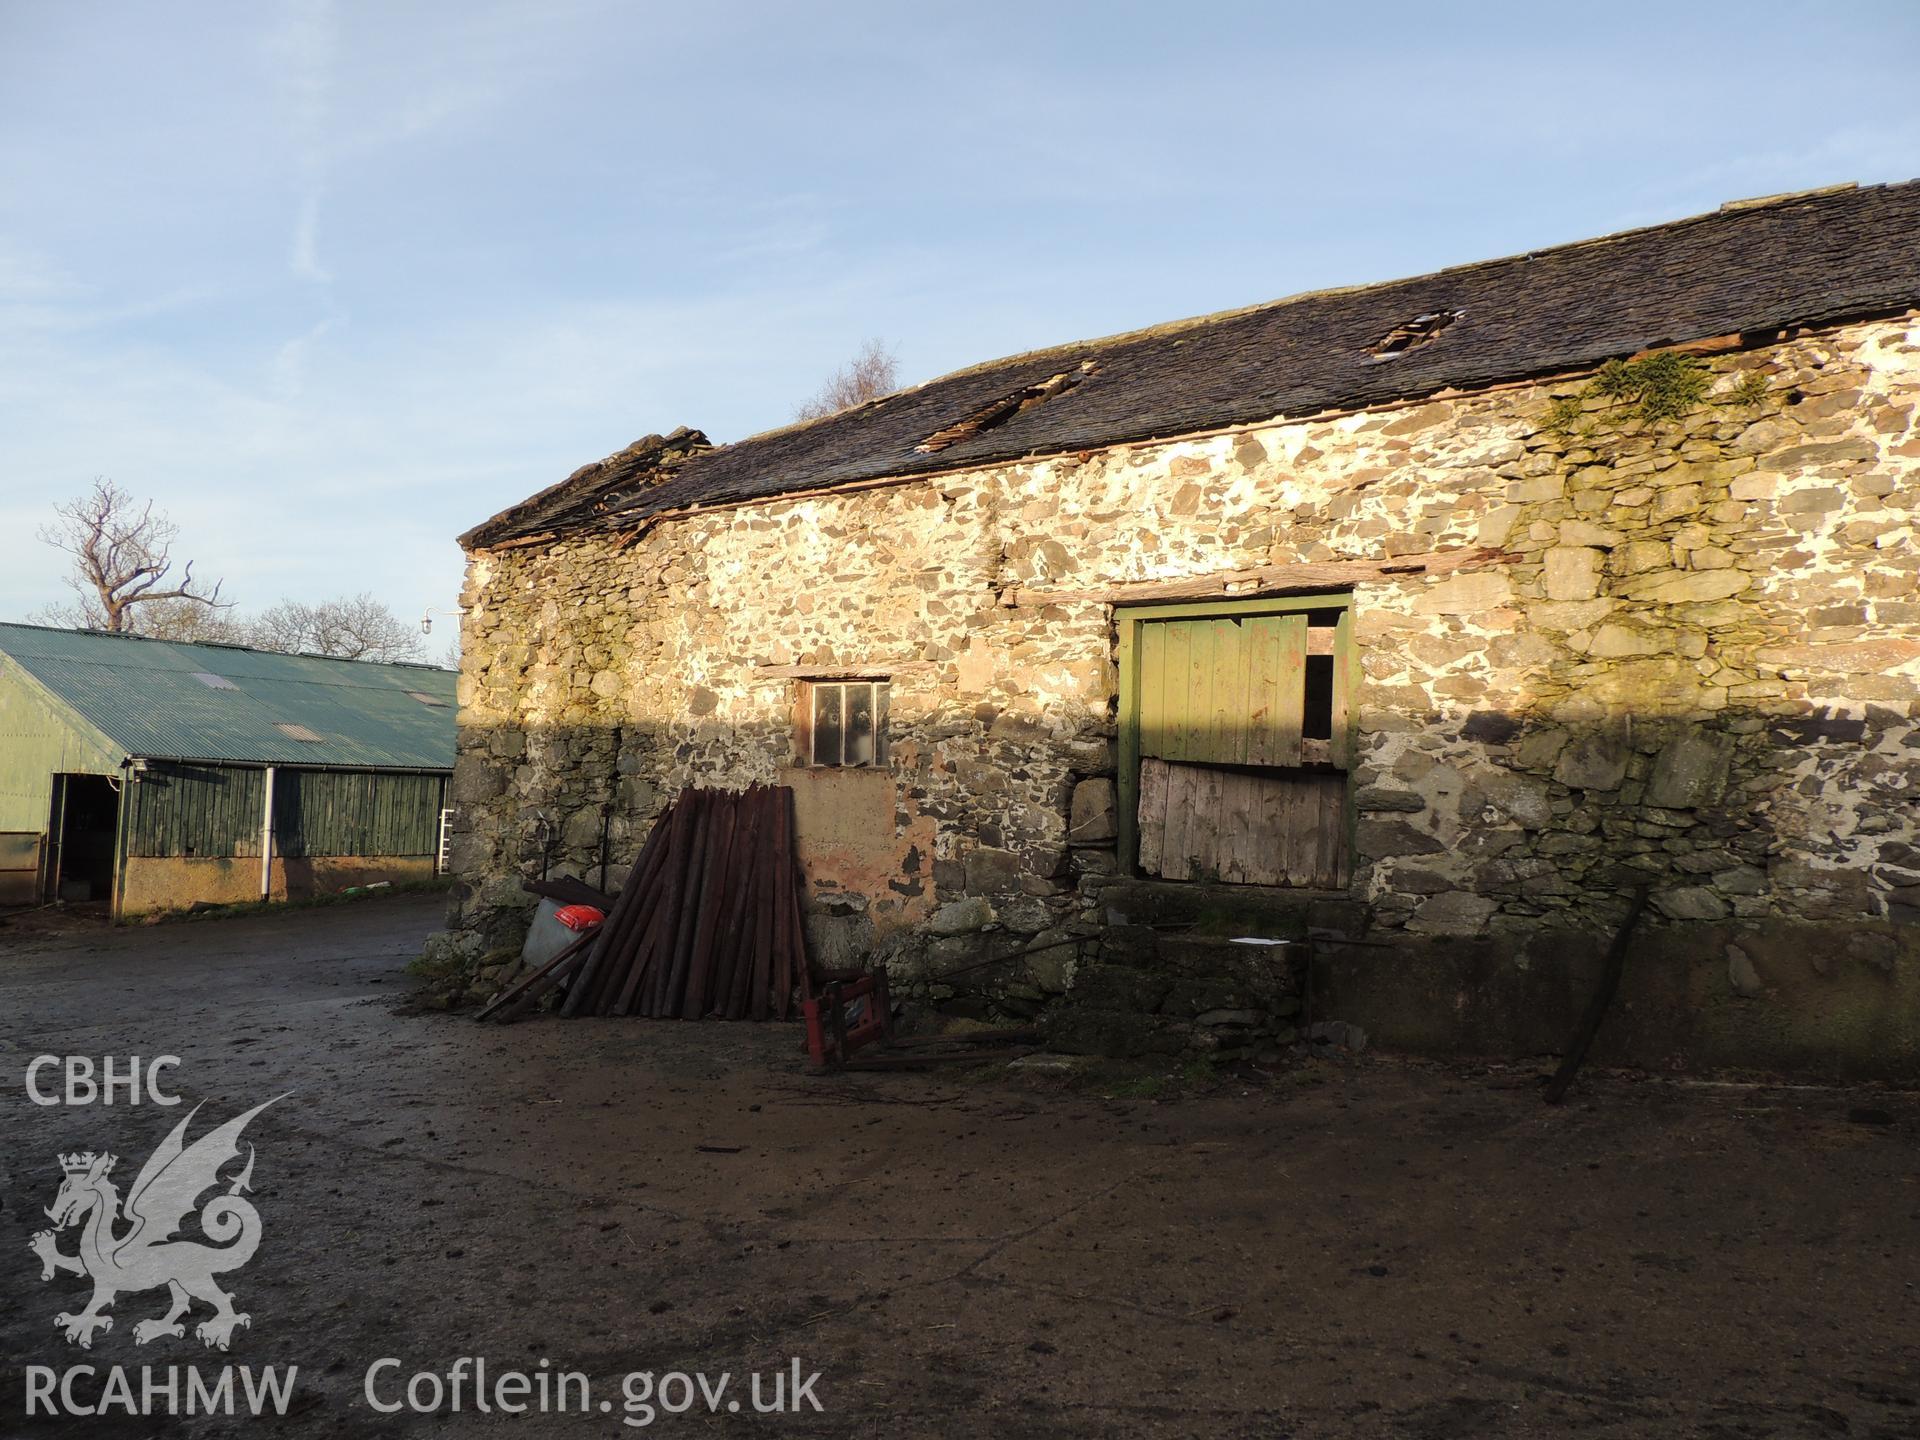 Detailed view of front elevation, looking north west. Photograph taken as part of archaeological building survey conducted at Bryn Gwylan Threshing Barn, Llangernyw, Conwy, carried out by Archaeology Wales, 2017-2018. Report no. 1640. Project no. 2578.